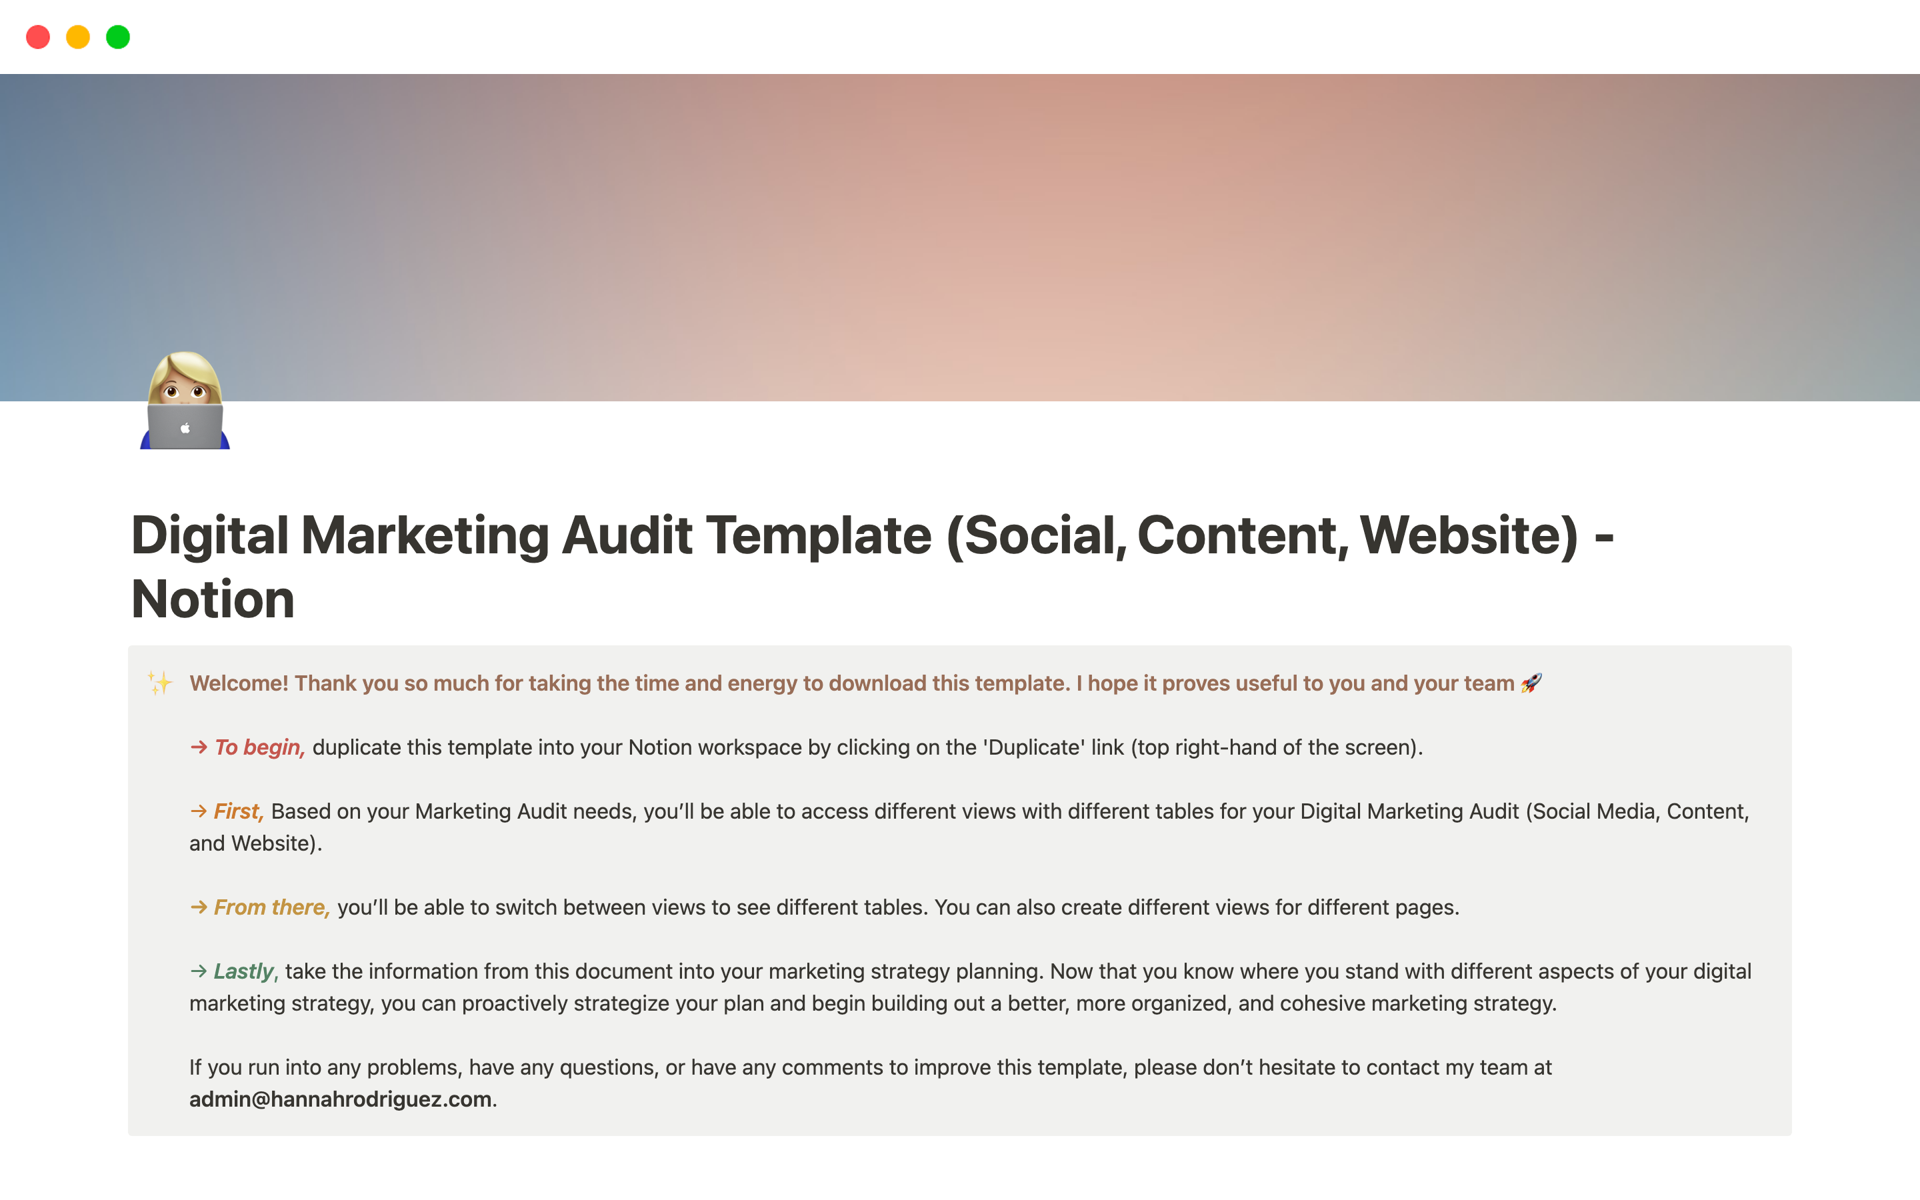 This Digital Marketing Audit Template seamlessly integrates evaluations for social media, content (blog), and website into one holistic tool, ensuring a panoramic view of your entire digital footprint. ✨